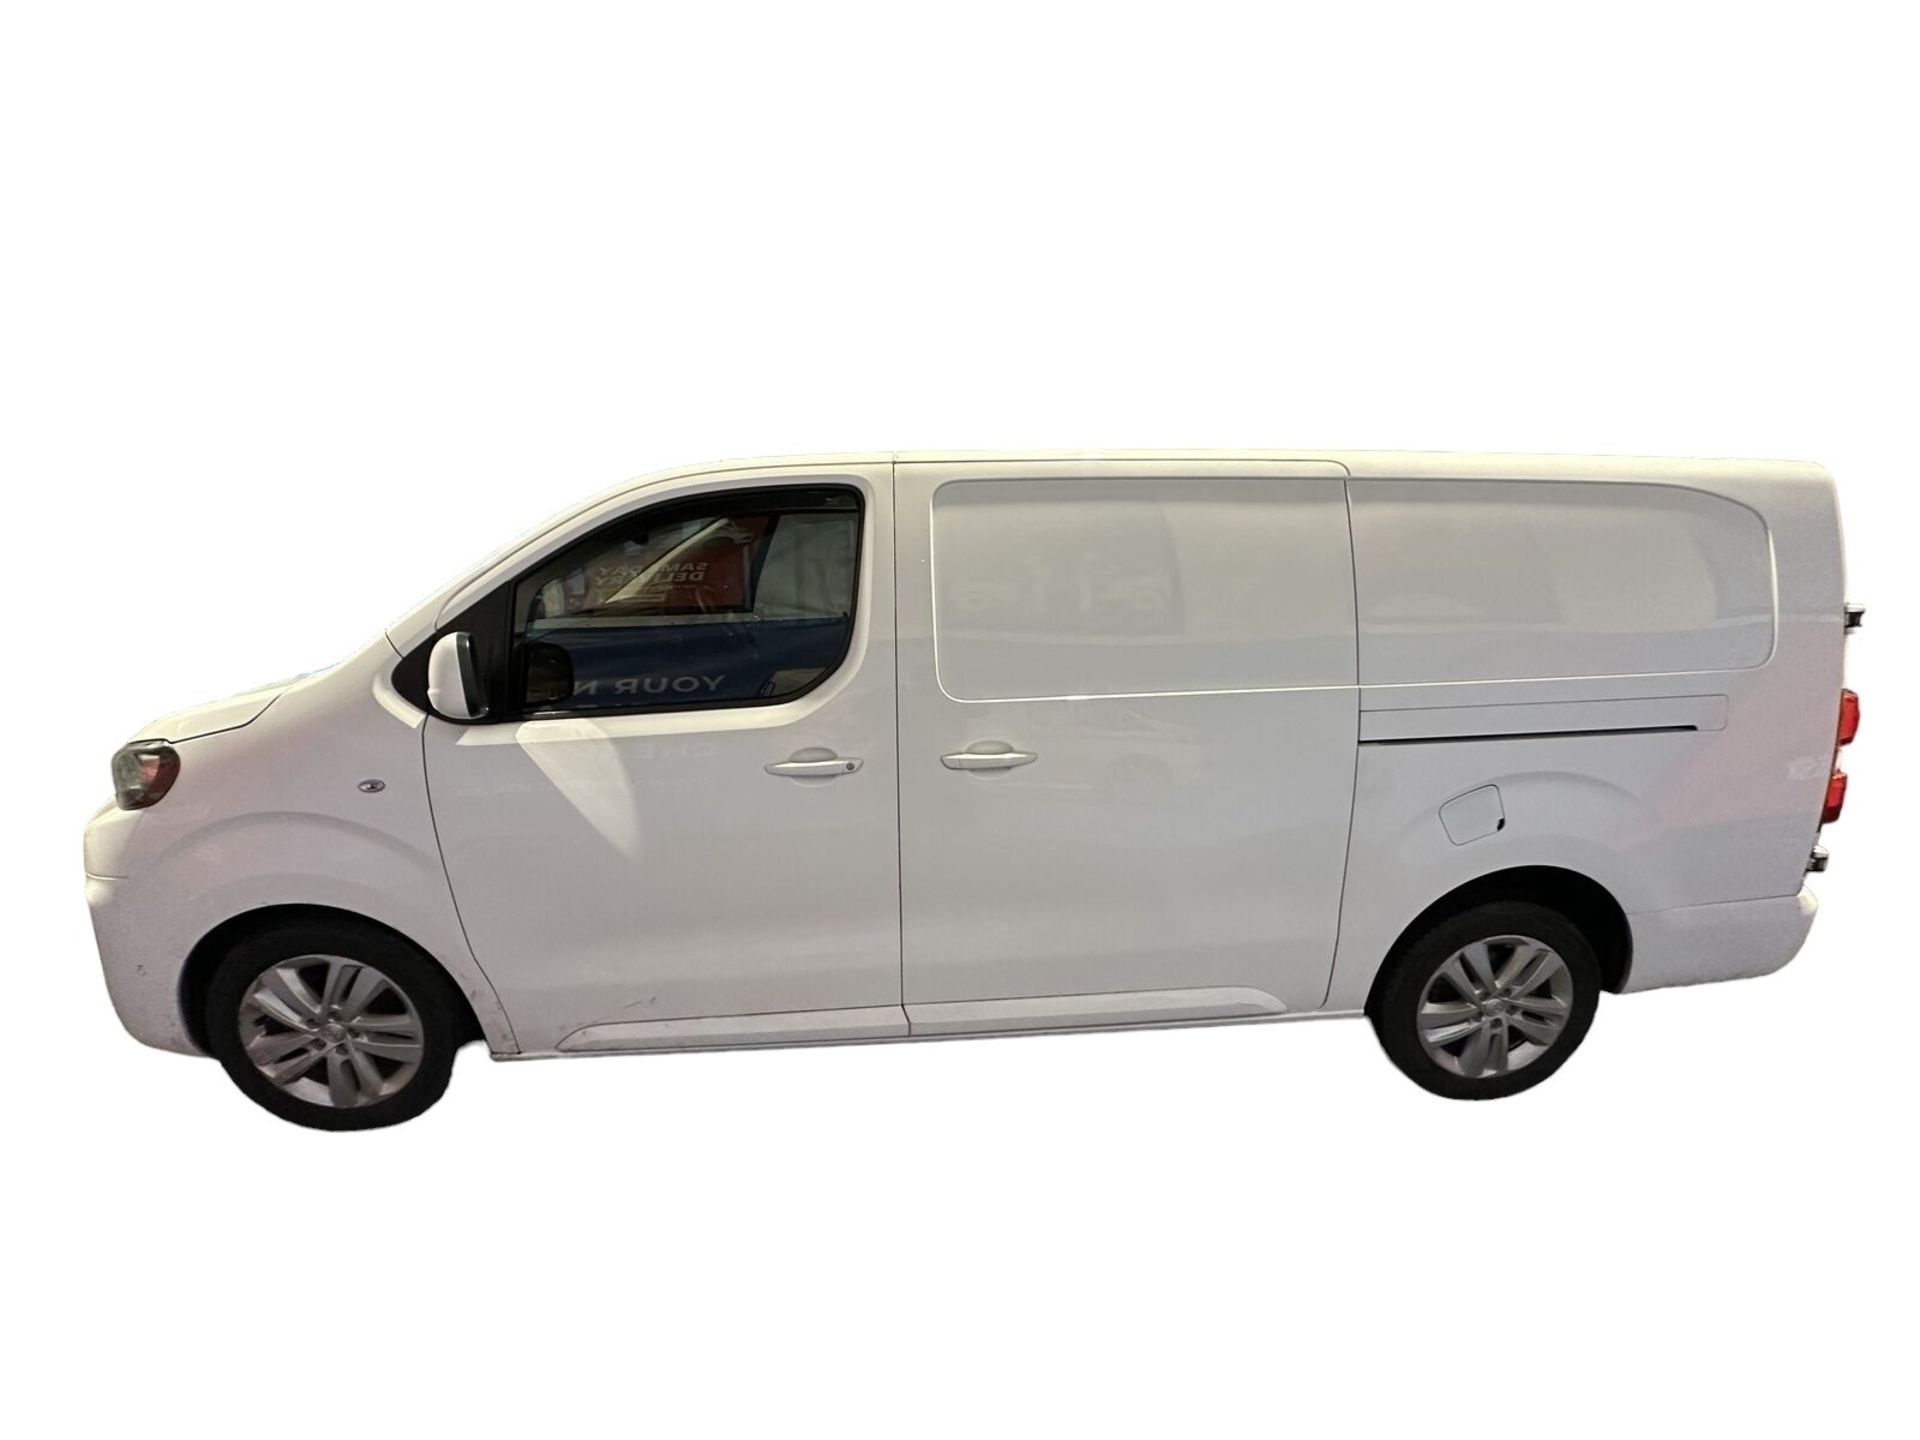 68 PLATE PEUGEOT EXPERT, AUTO, IMMACULATE BEAUTY >>--NO VAT ON HAMMER--<< - Image 2 of 12